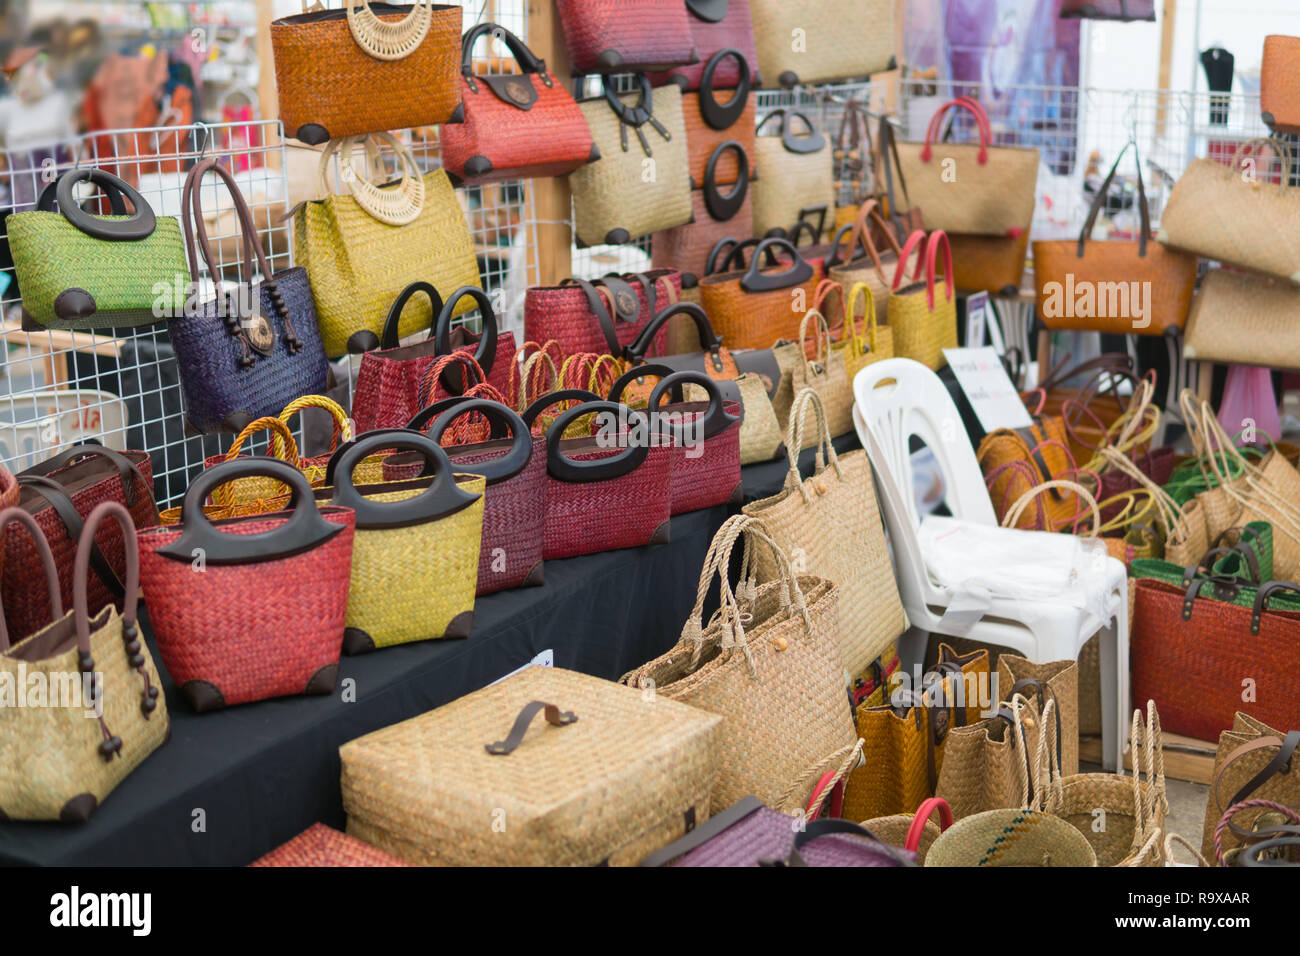 BANGKOK,THAILAND - 2 FEBRUARY 2017 : Selling Leather Bag At Shop In Market  Stock Photo, Picture and Royalty Free Image. Image 71695796.